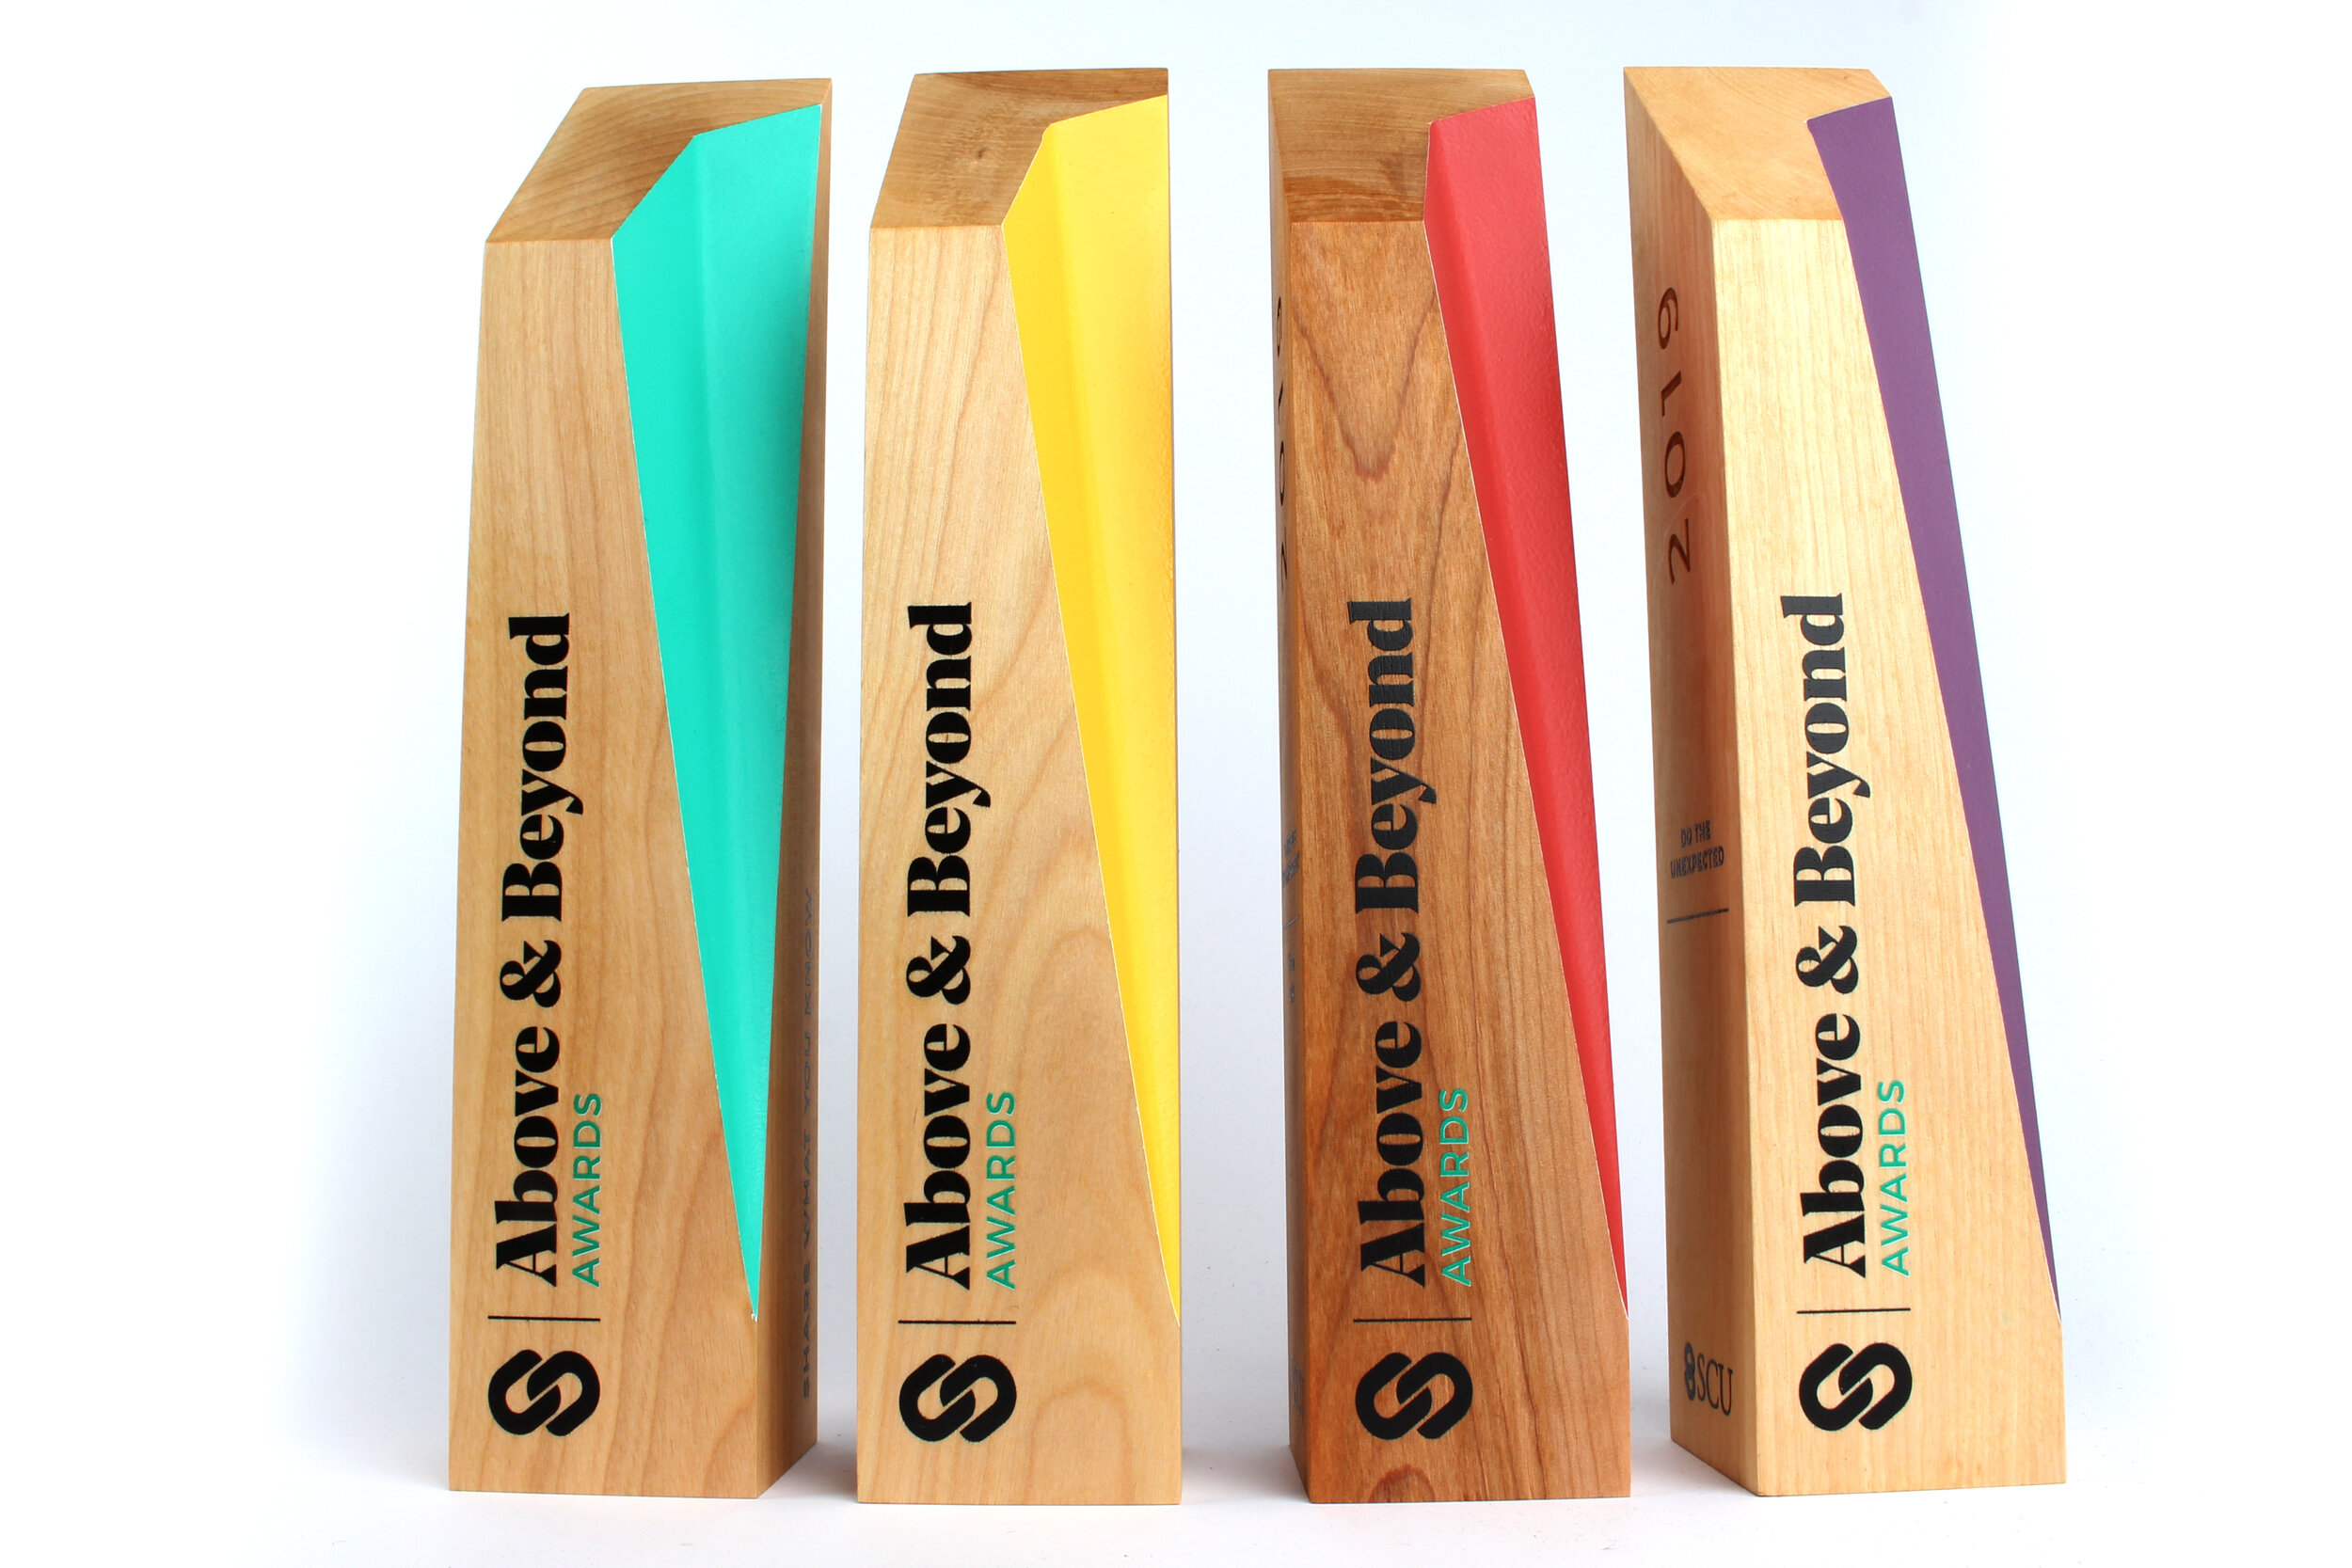 SCU modern beautiful sustainable wooden awards great for corporate recognition or service awards